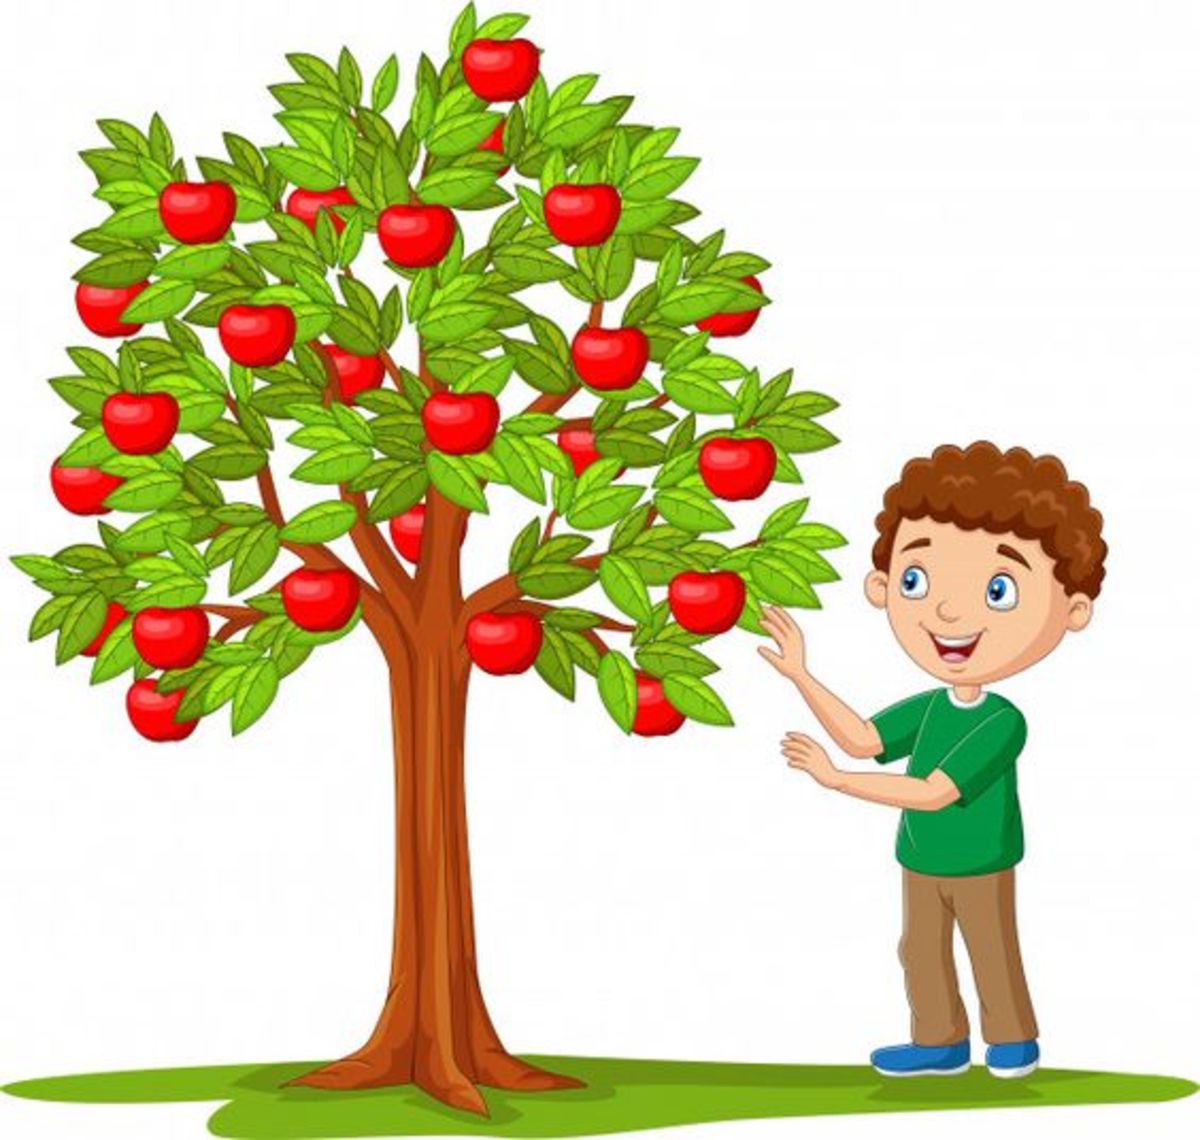 The Apple Tree and the Boy's Friendship